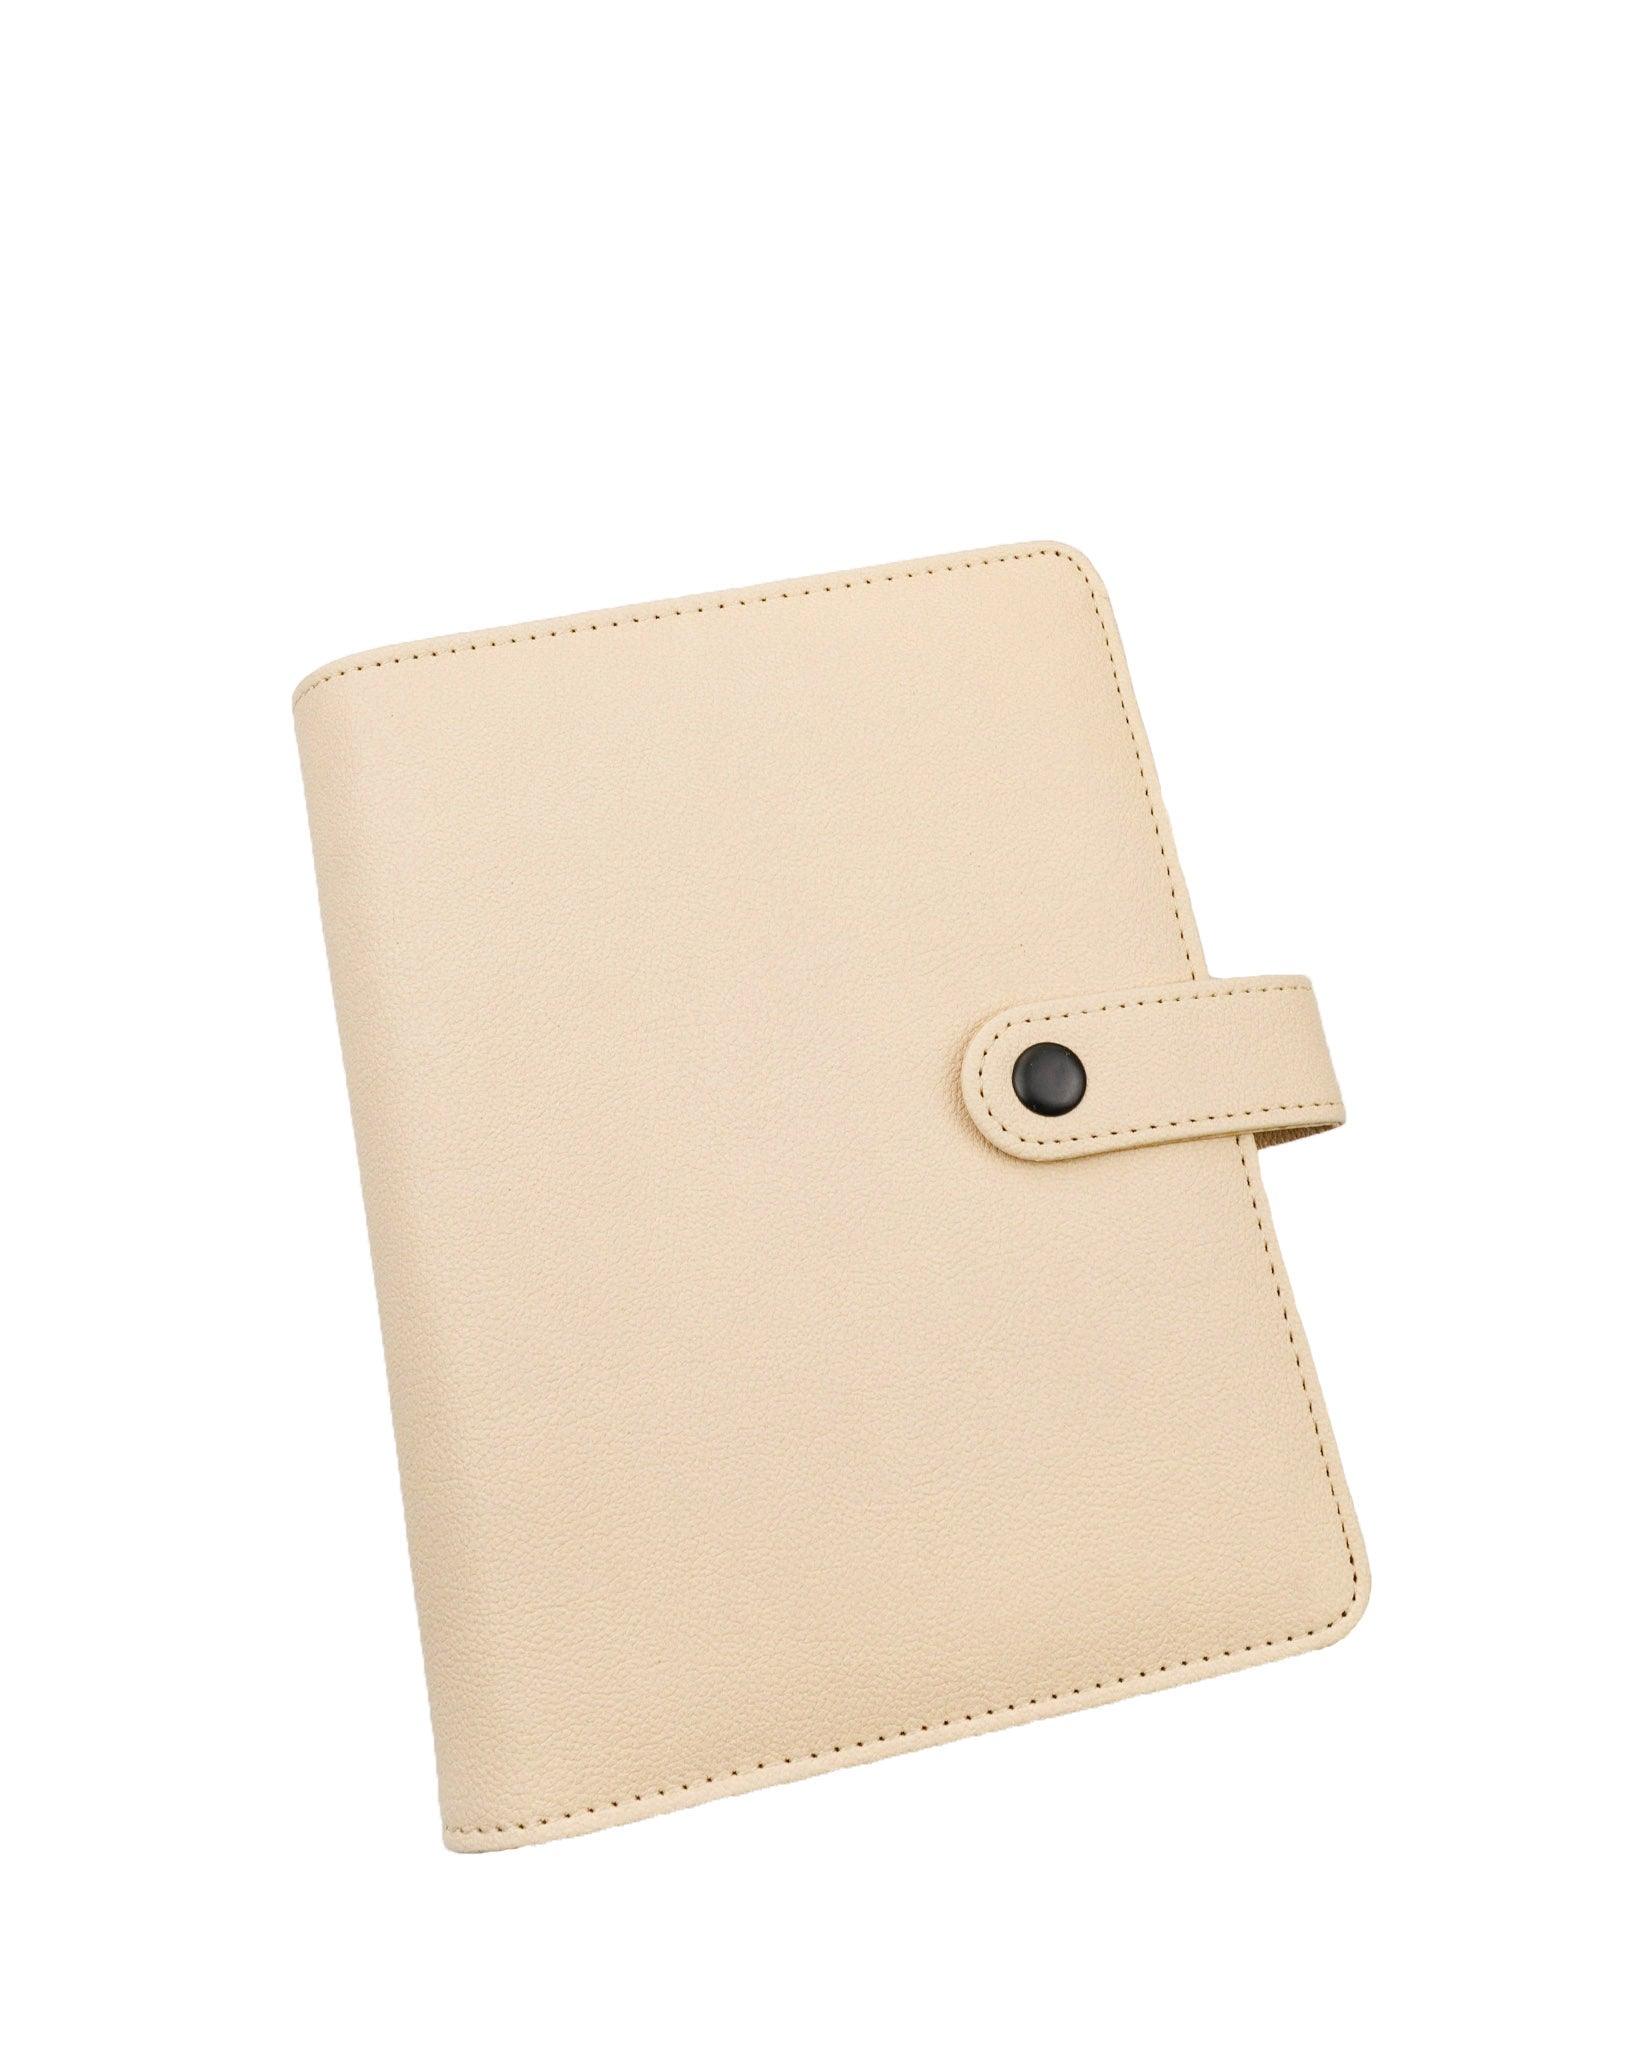 Vegan Leather Planner Cover, Six Ring, Crème